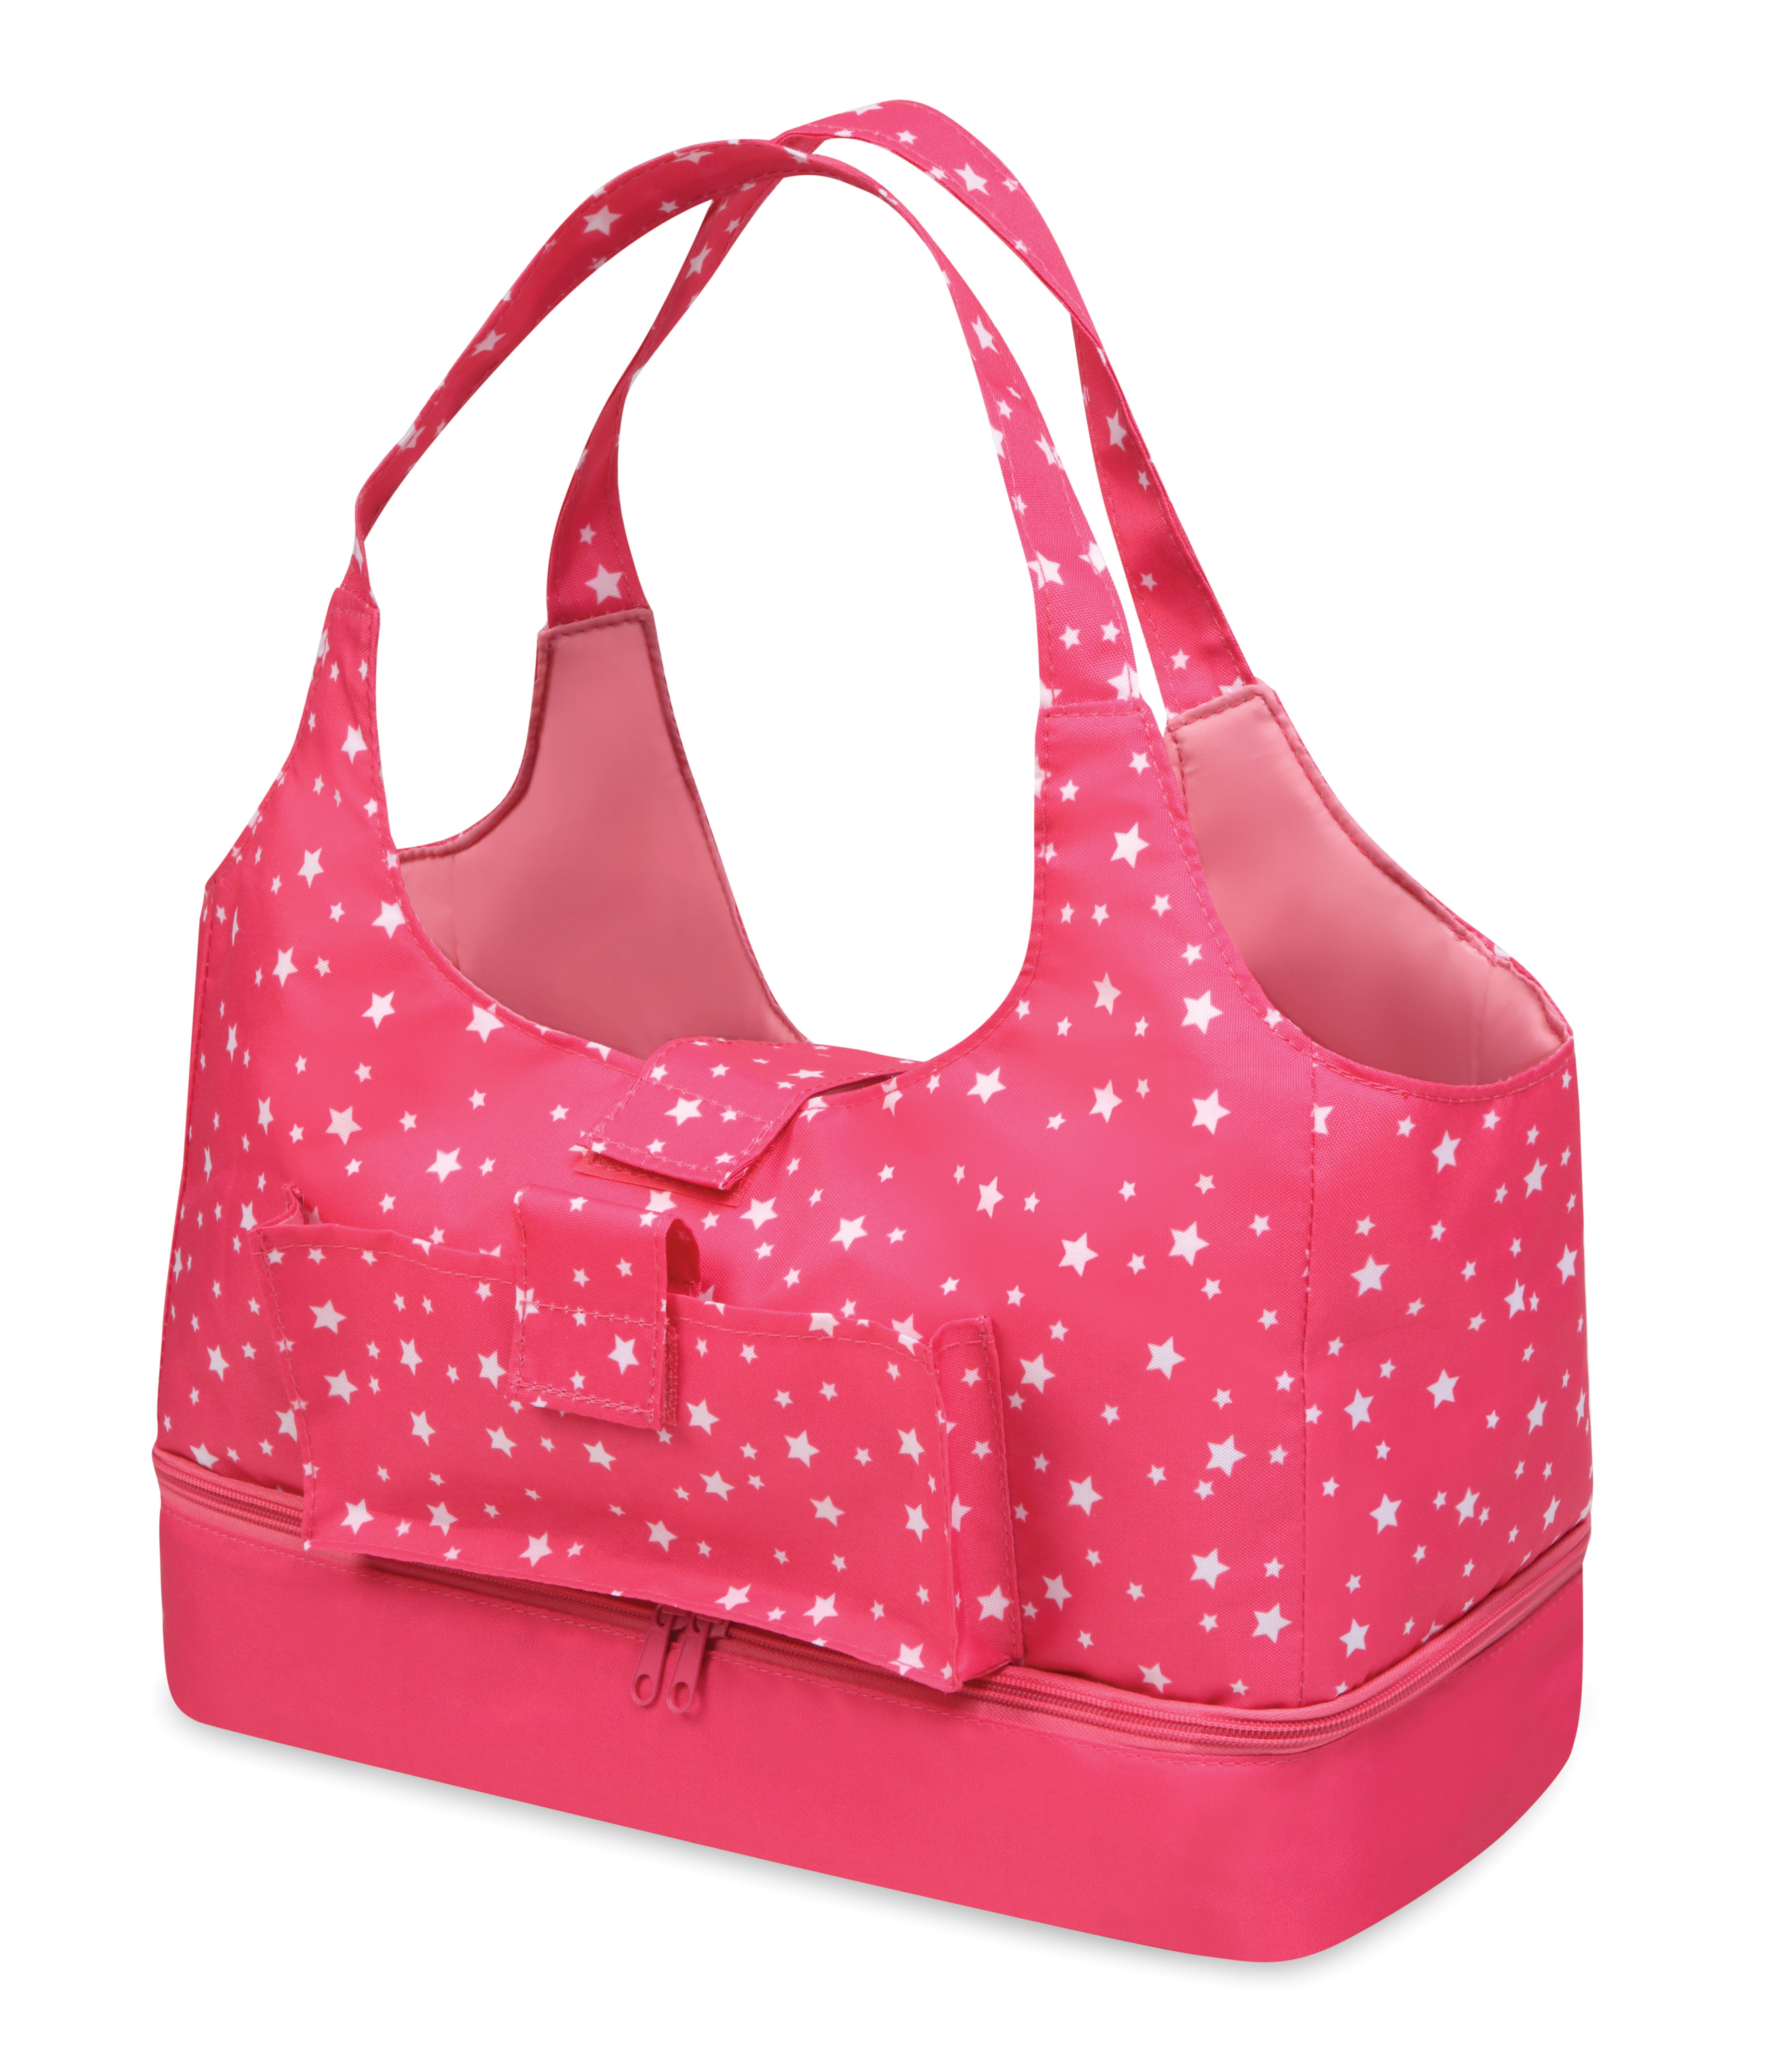 New American Girl Starry Tote~Pink/White Carrier Travel Bag Storage Holds 2 Doll